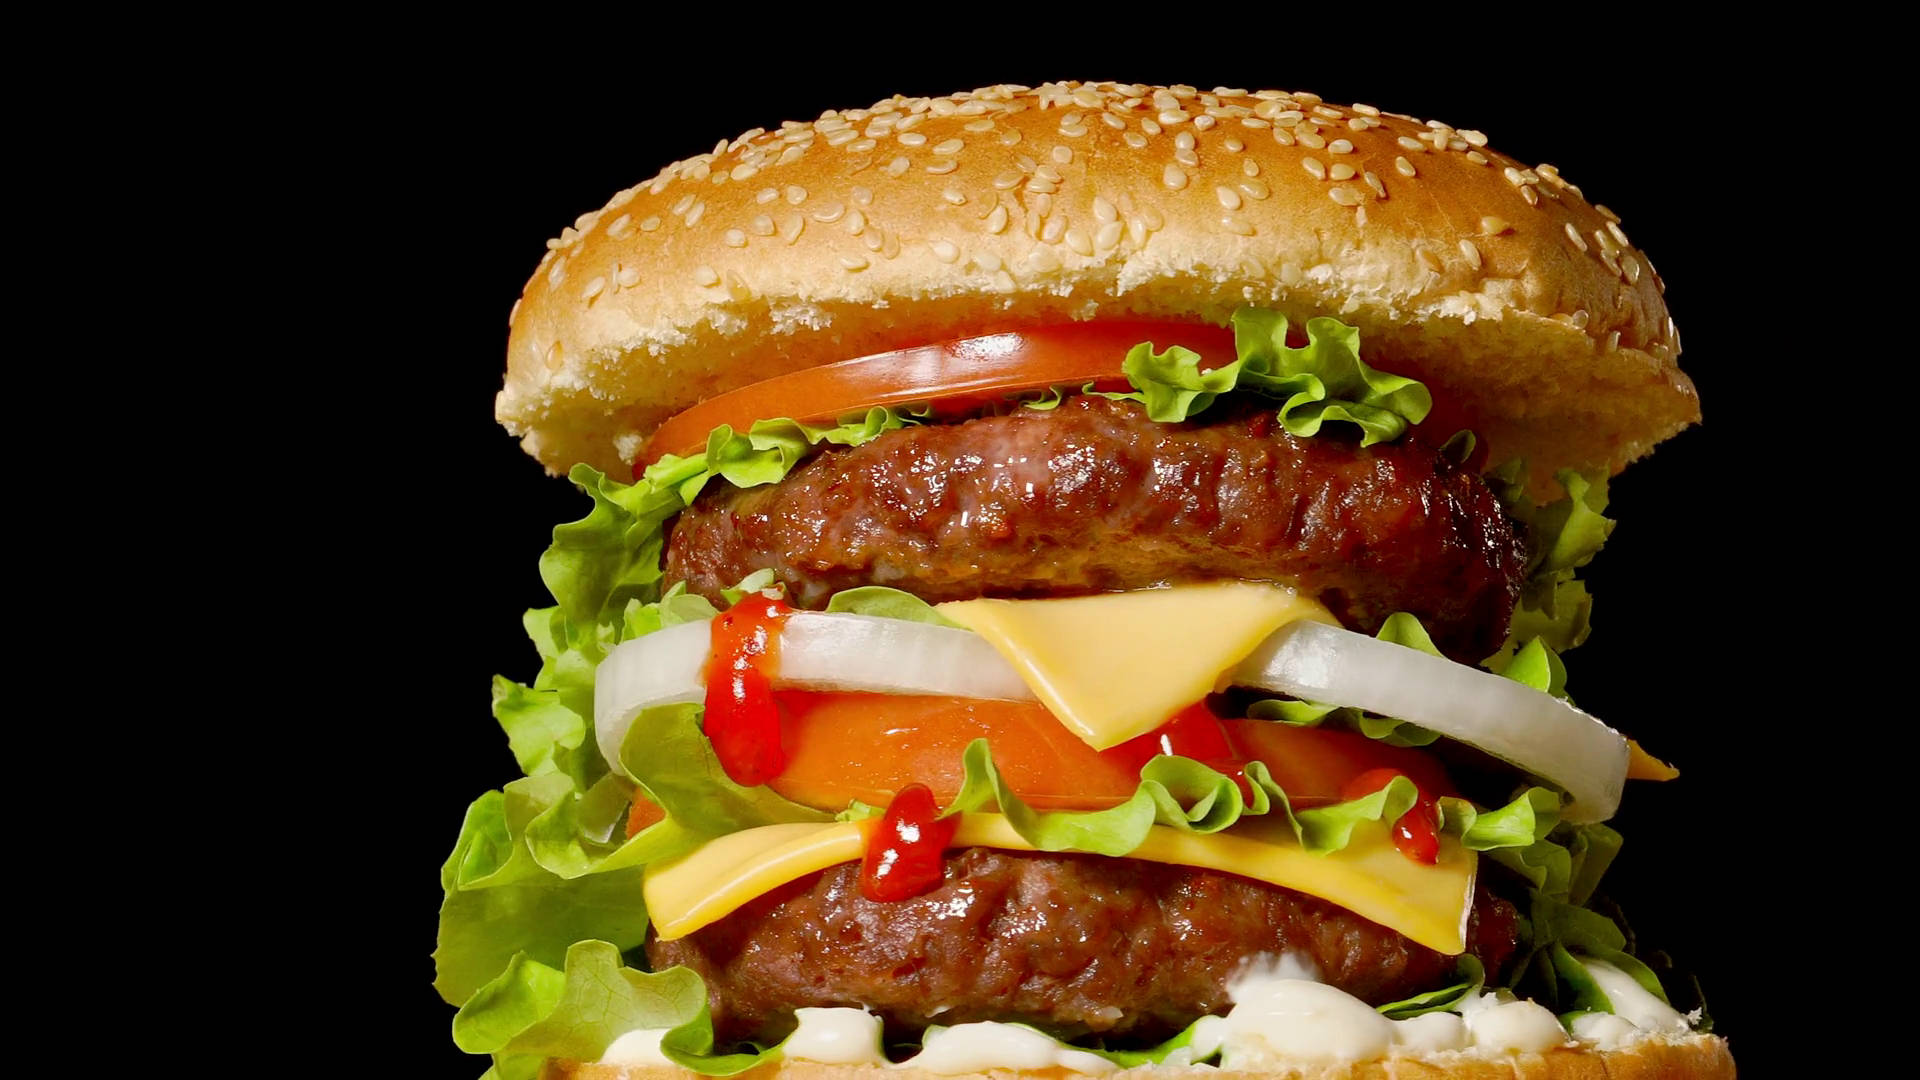 Cheeseburger On A Black Background Wallpaper